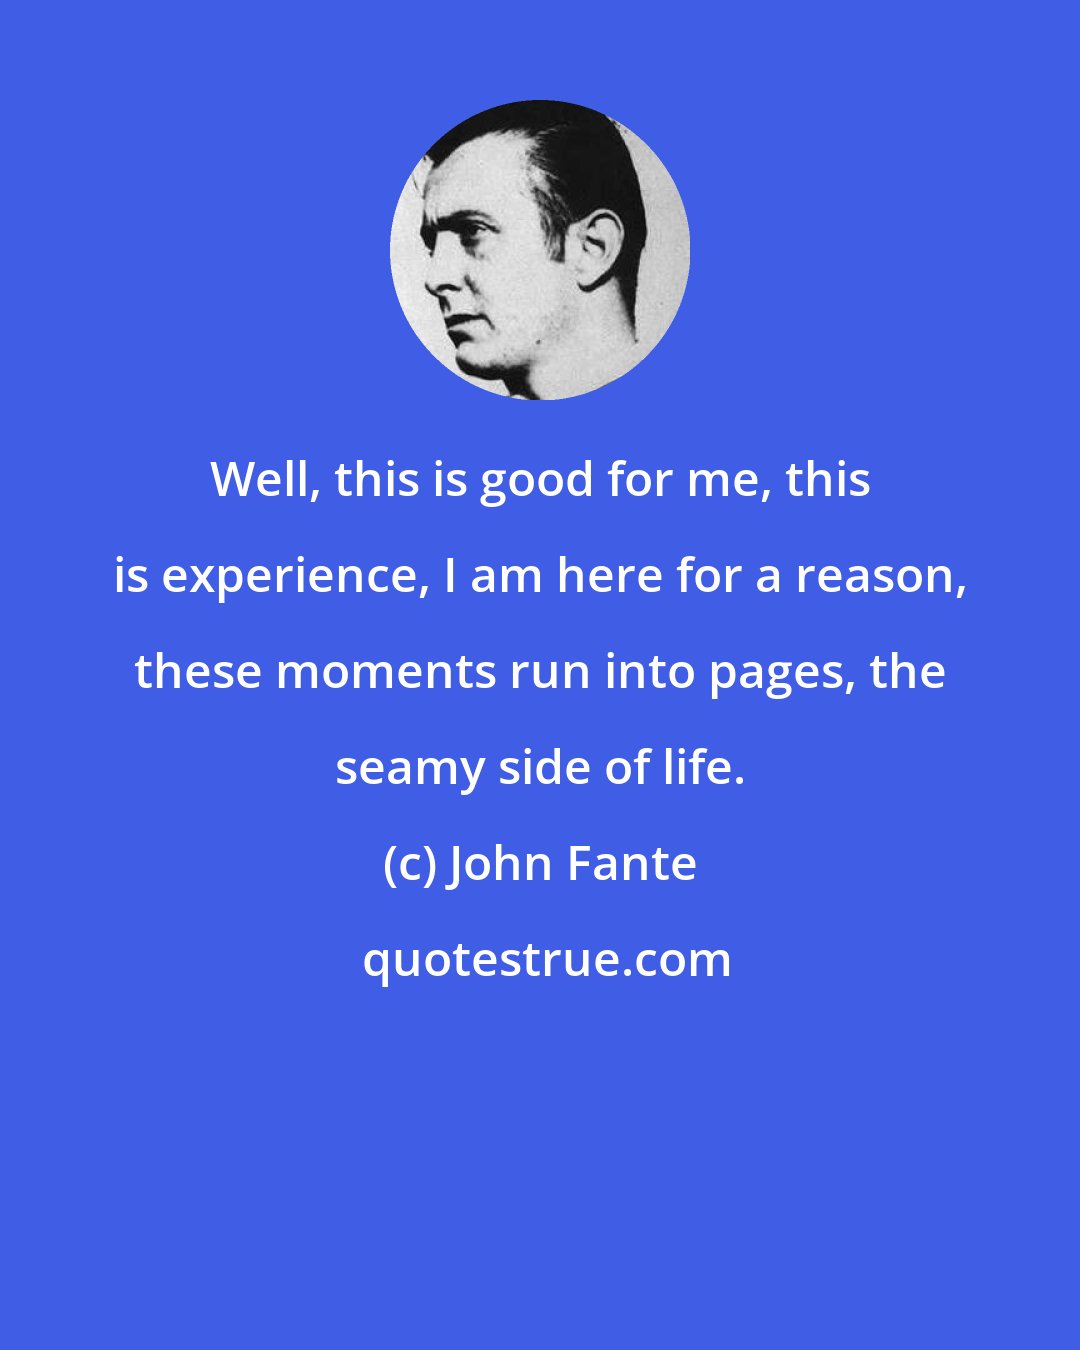 John Fante: Well, this is good for me, this is experience, I am here for a reason, these moments run into pages, the seamy side of life.